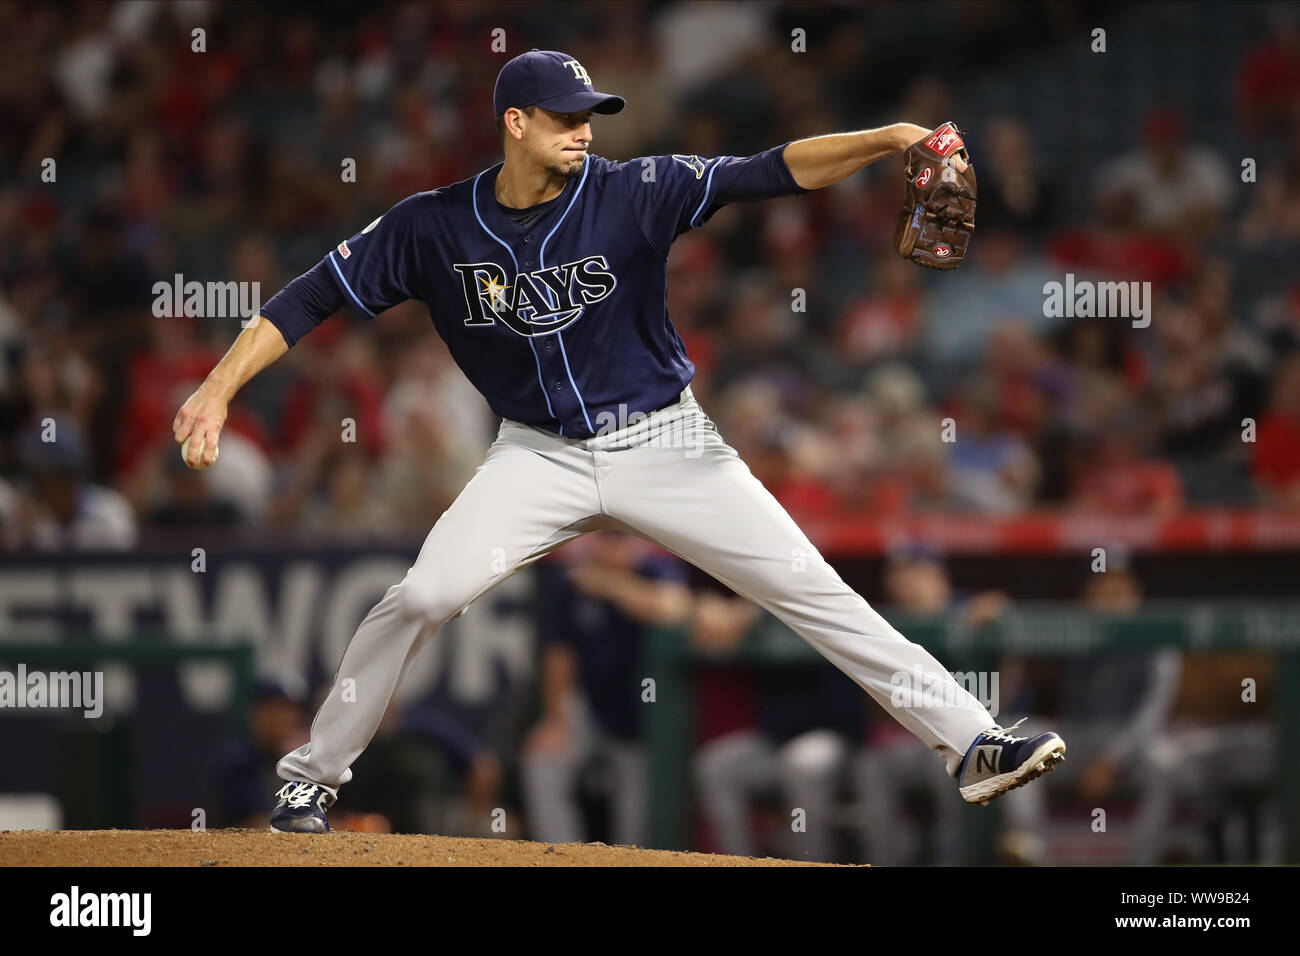 Anaheim, California, USA. 13th Sep, 2019. September 13, 2019: Tampa Bay Rays starting pitcher Charlie Morton (50) makes the start for the Rays during the game between the Tampa Bay Rays and the Los Angeles Angels of Anaheim at Angel Stadium in Anaheim, CA, (Photo by Peter Joneleit, Cal Sport Media) Credit: Cal Sport Media/Alamy Live News Stock Photo